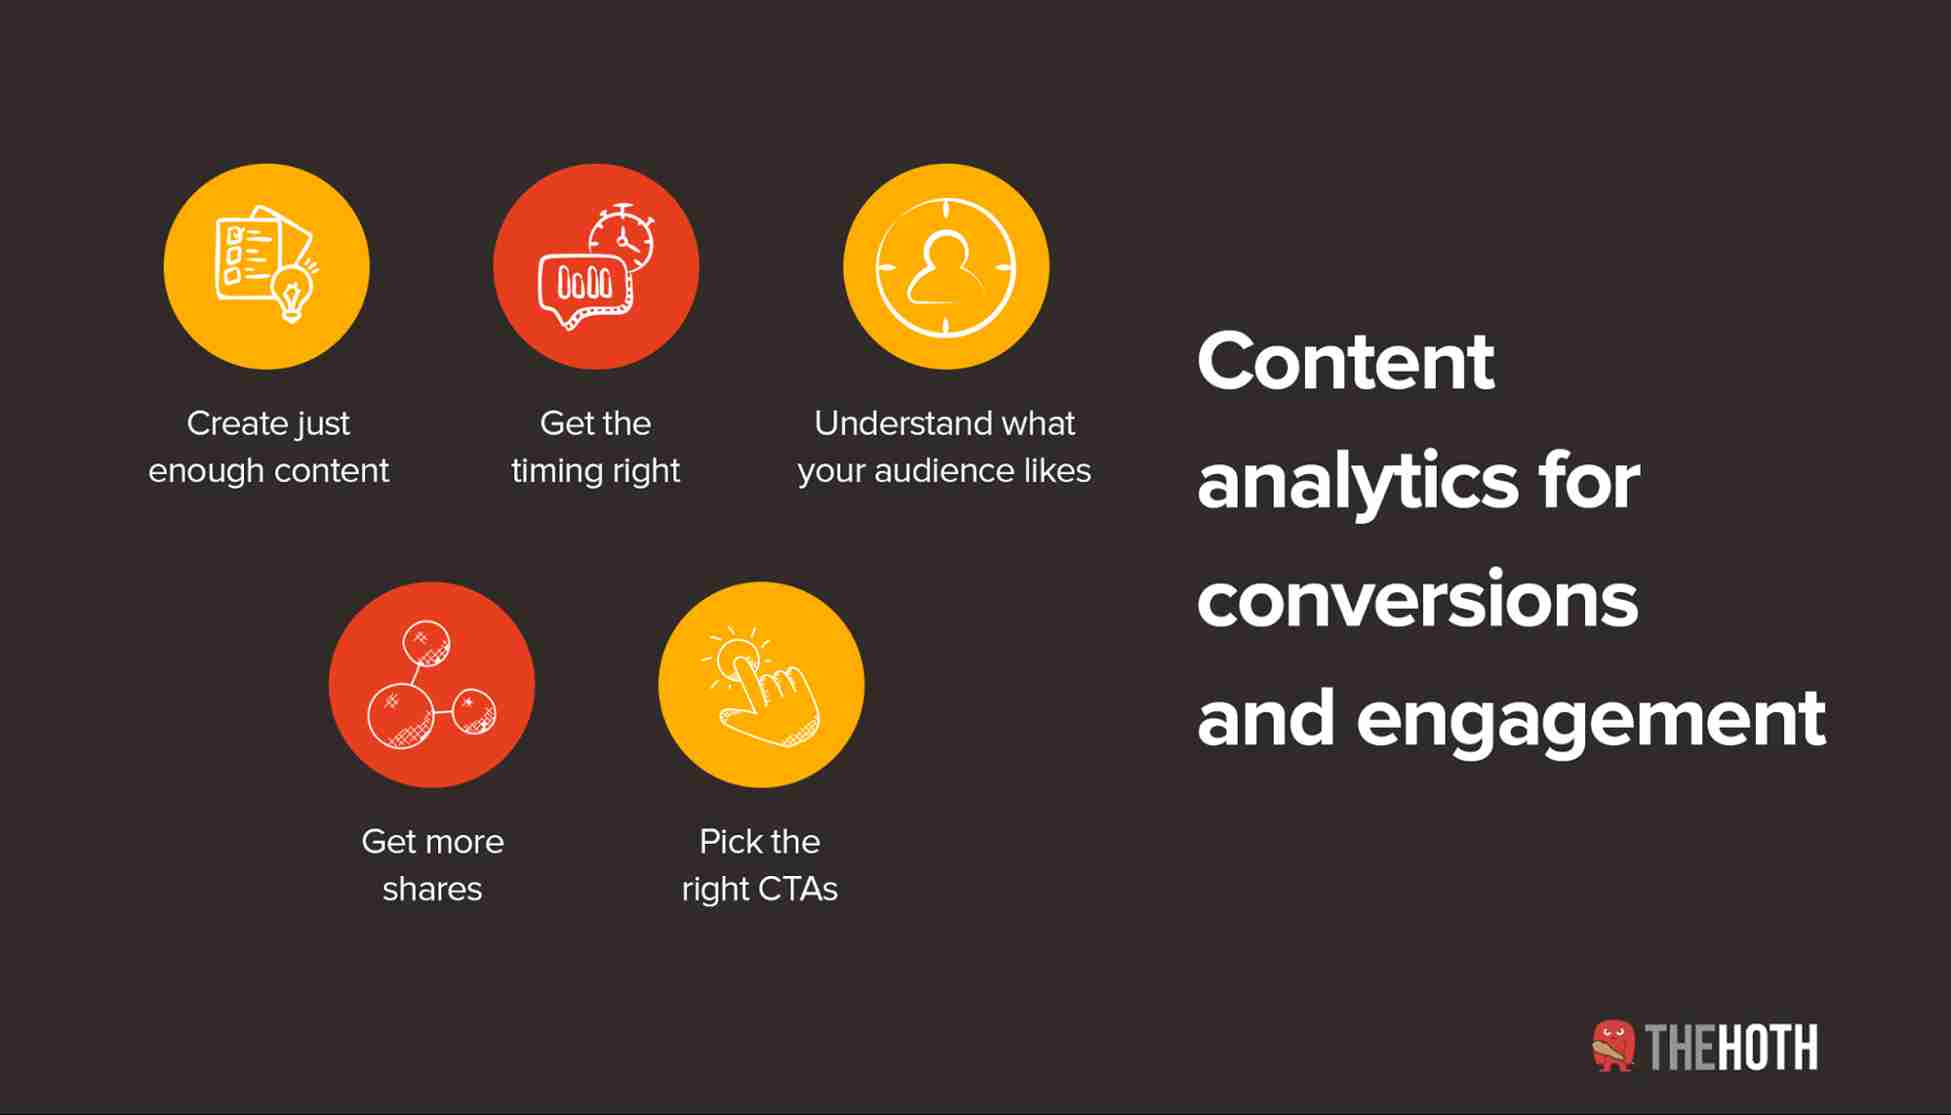 How content analytics helps boost conversions